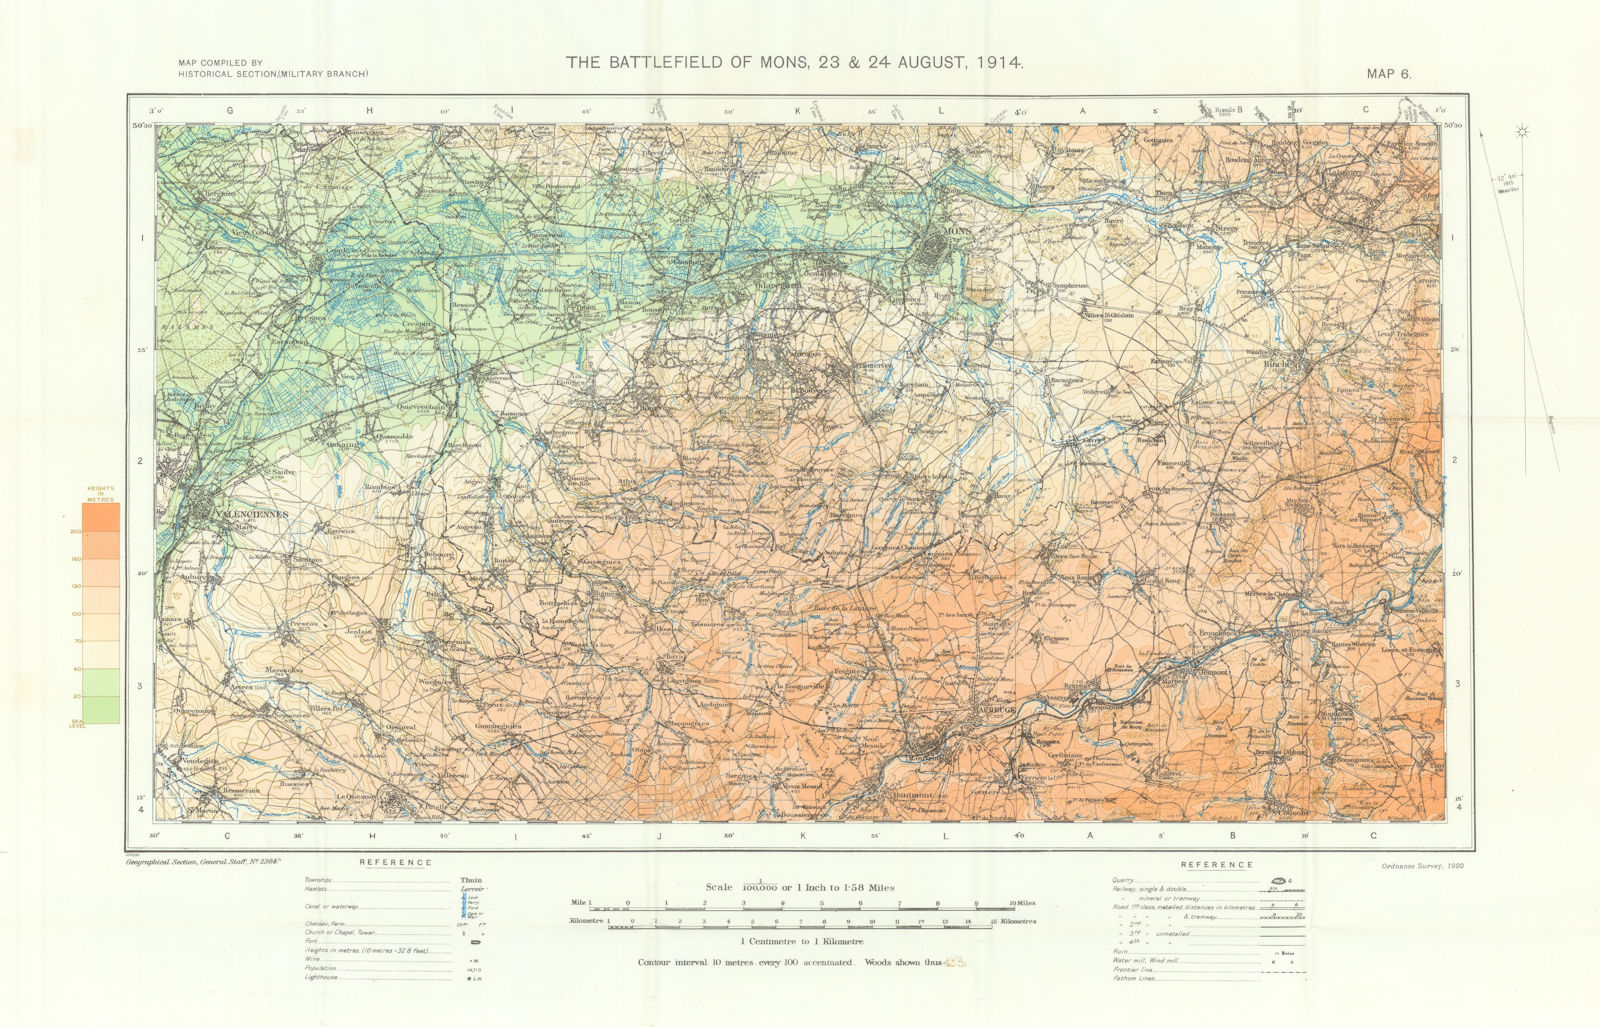 The Mons battlefield, 23-24 August 1914. First World War. 1933 old vintage map